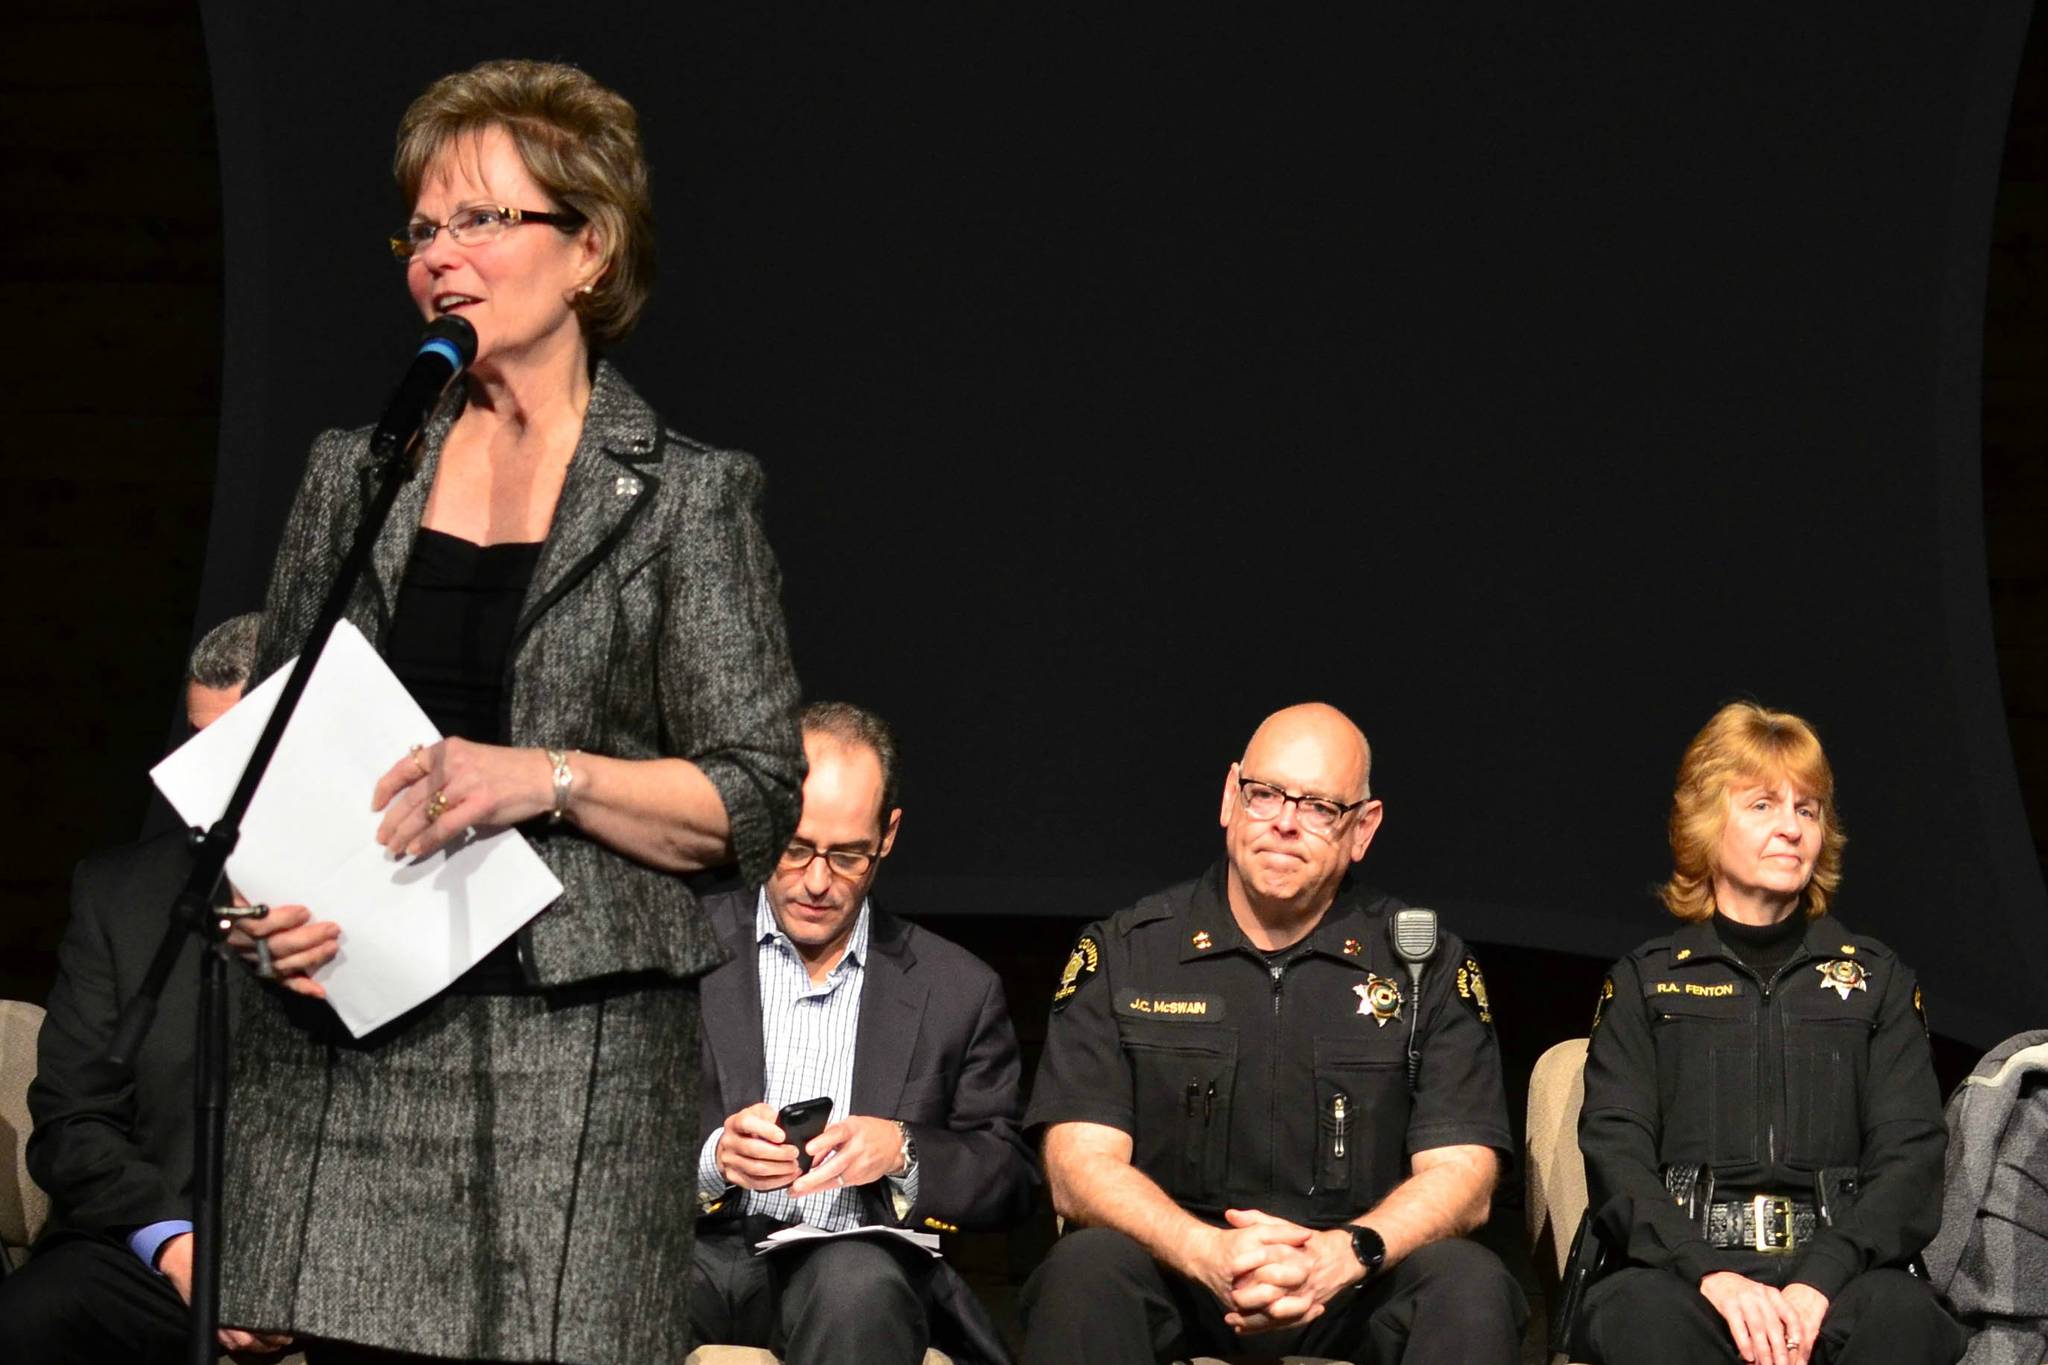 King County Councilmember Kathy Lambert leads the discussion at the opioid event on Monday night. Photo by Josh Kelety